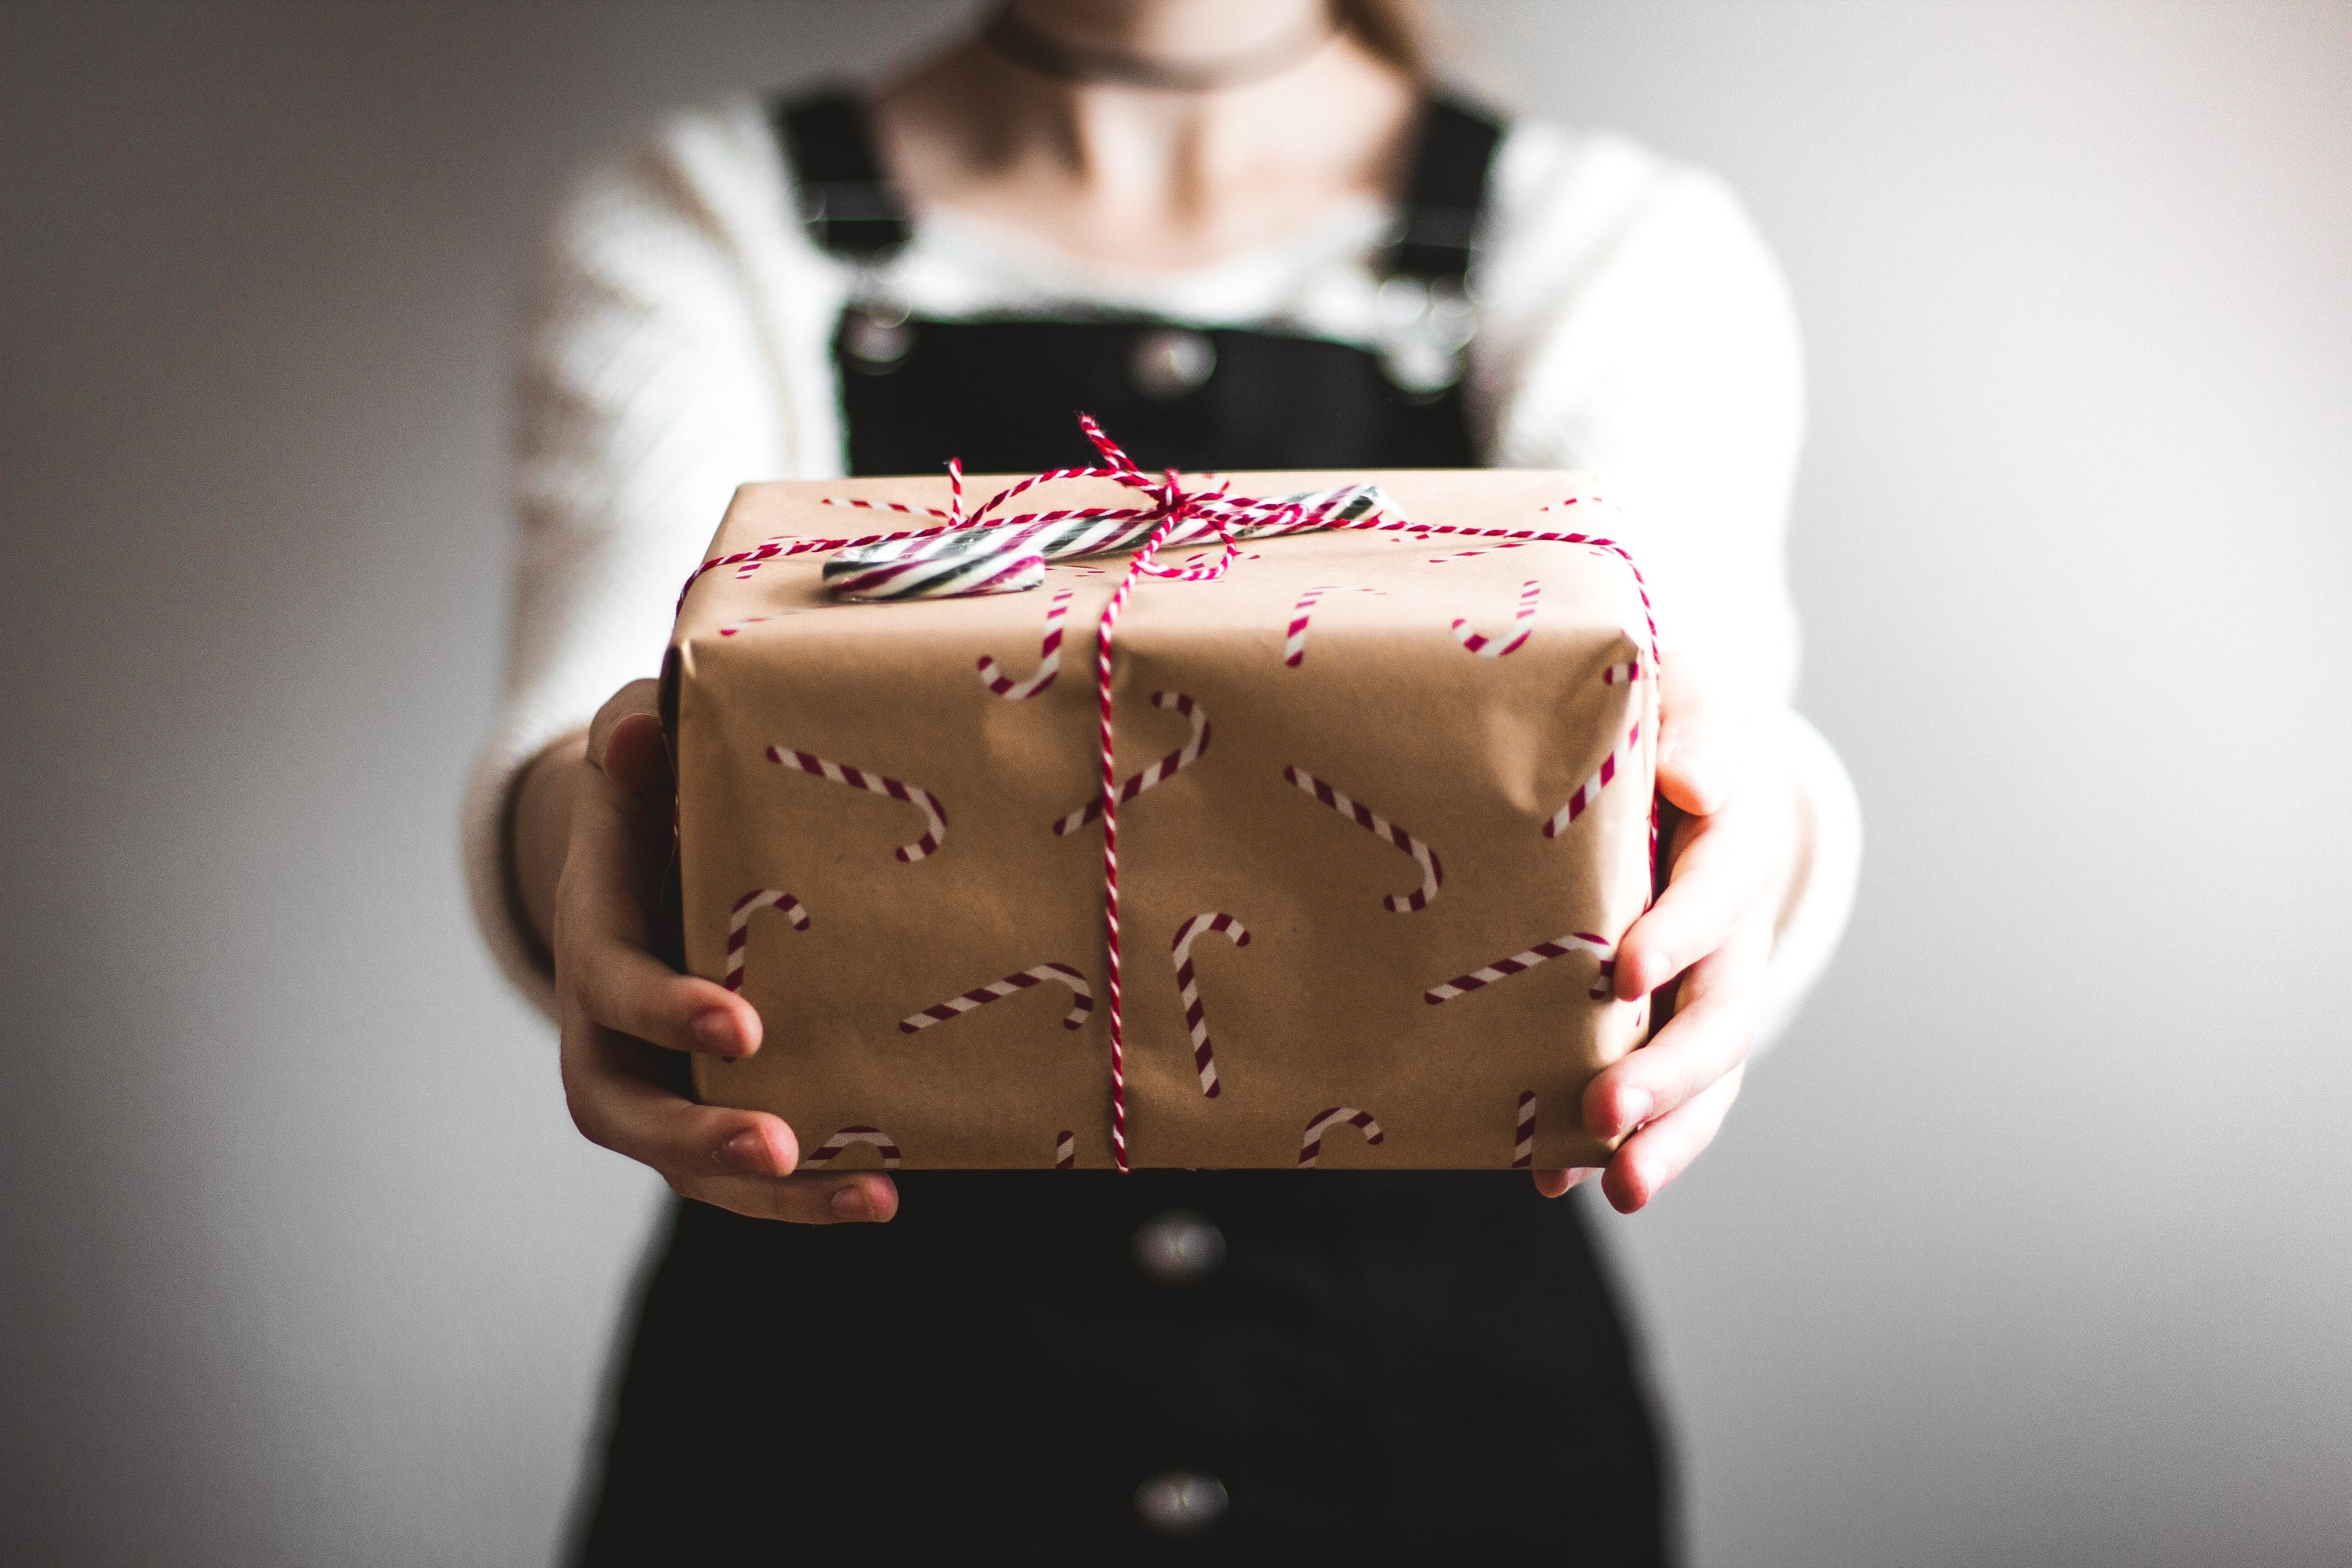 What to think about when giving gifts